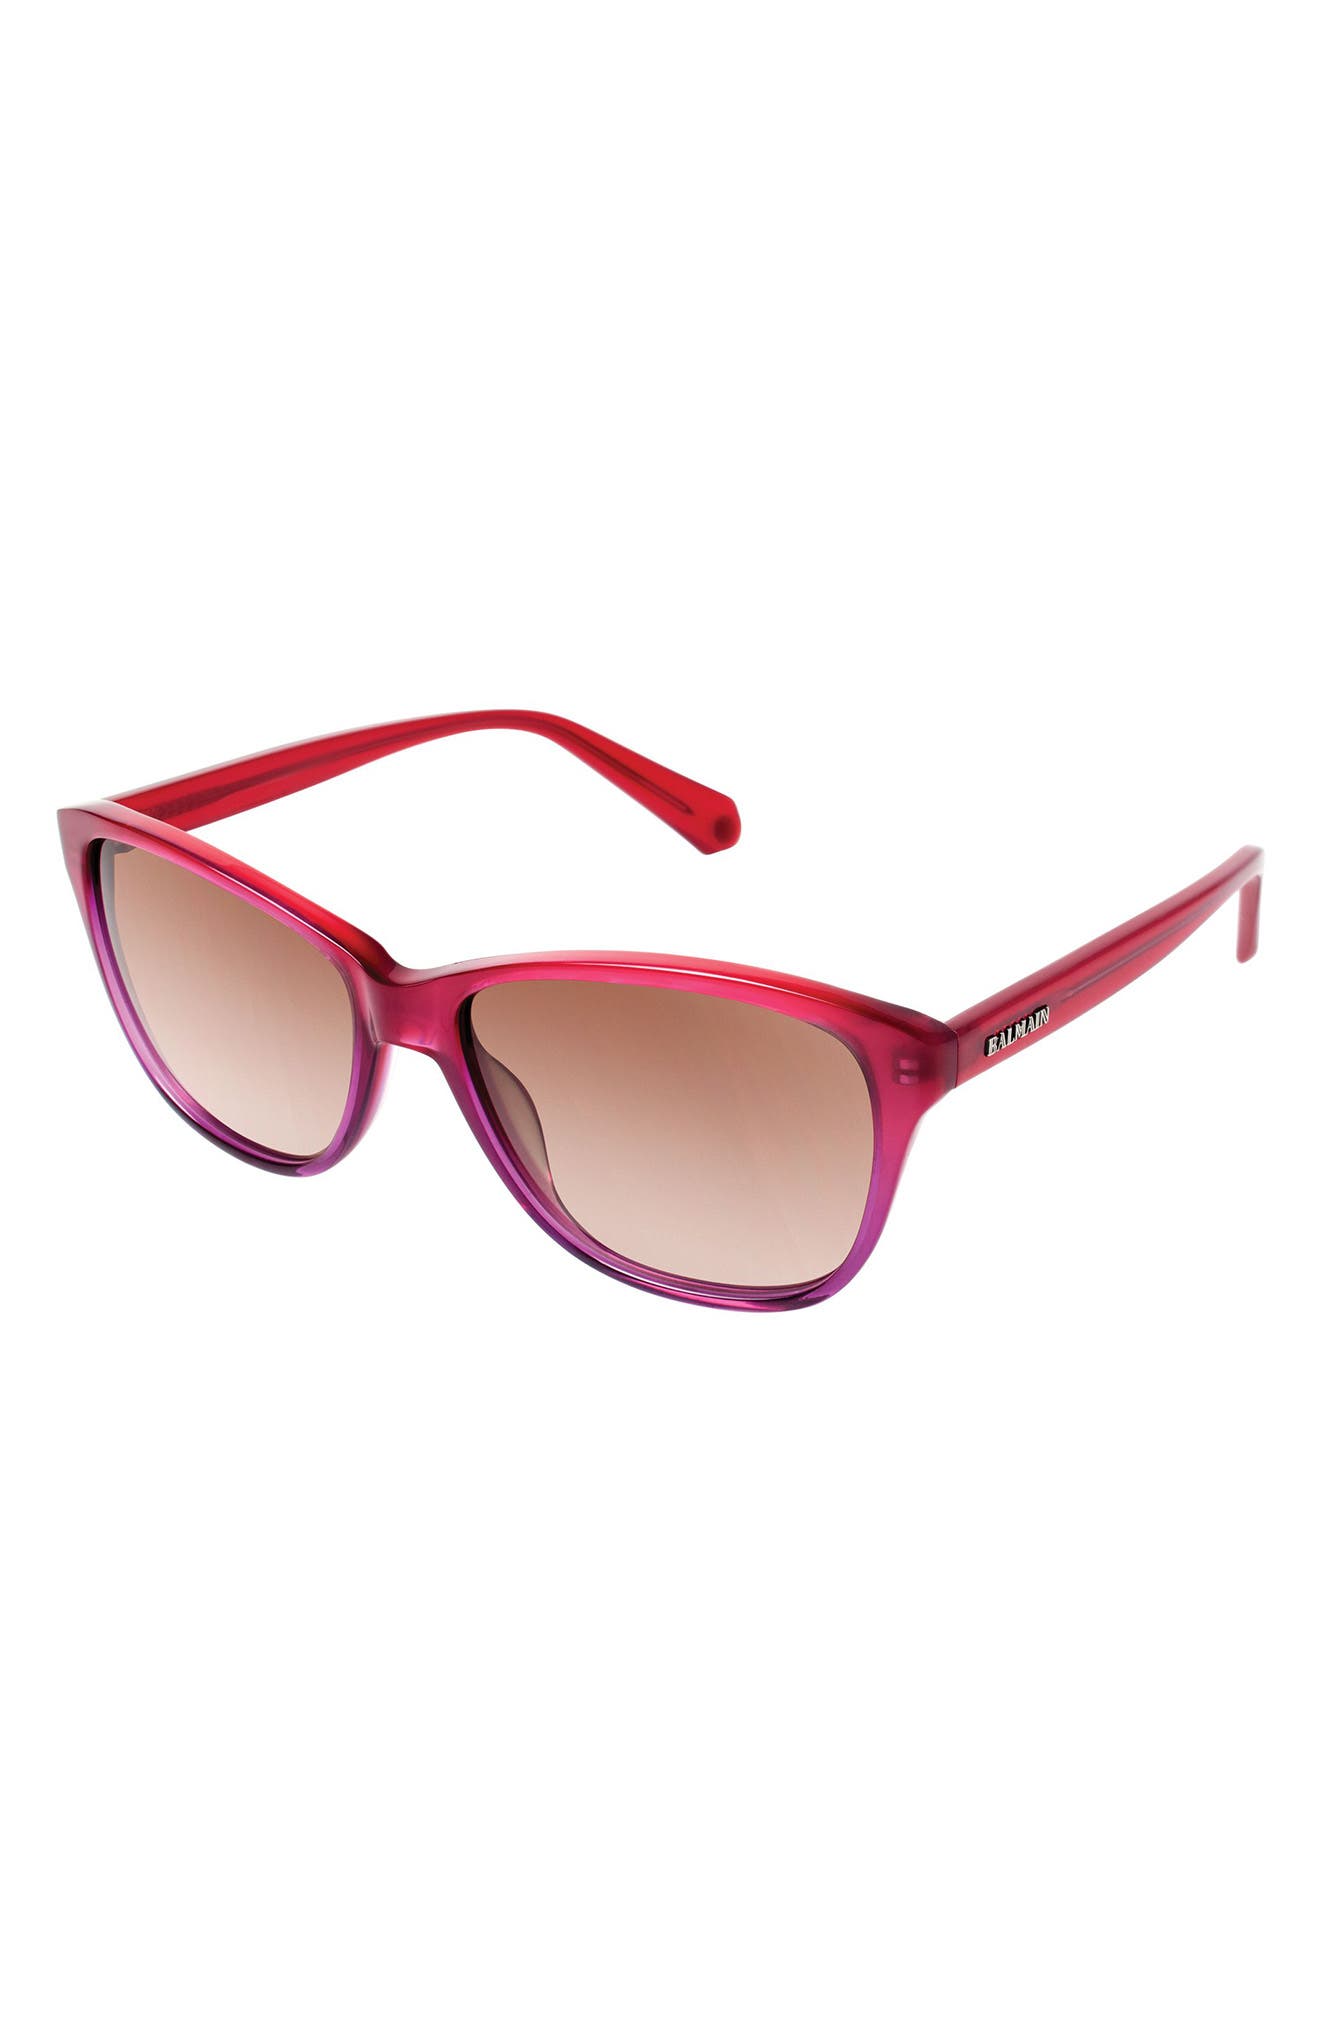 Balmain 56mm Polarized Square Sunglasses In Red / Pink